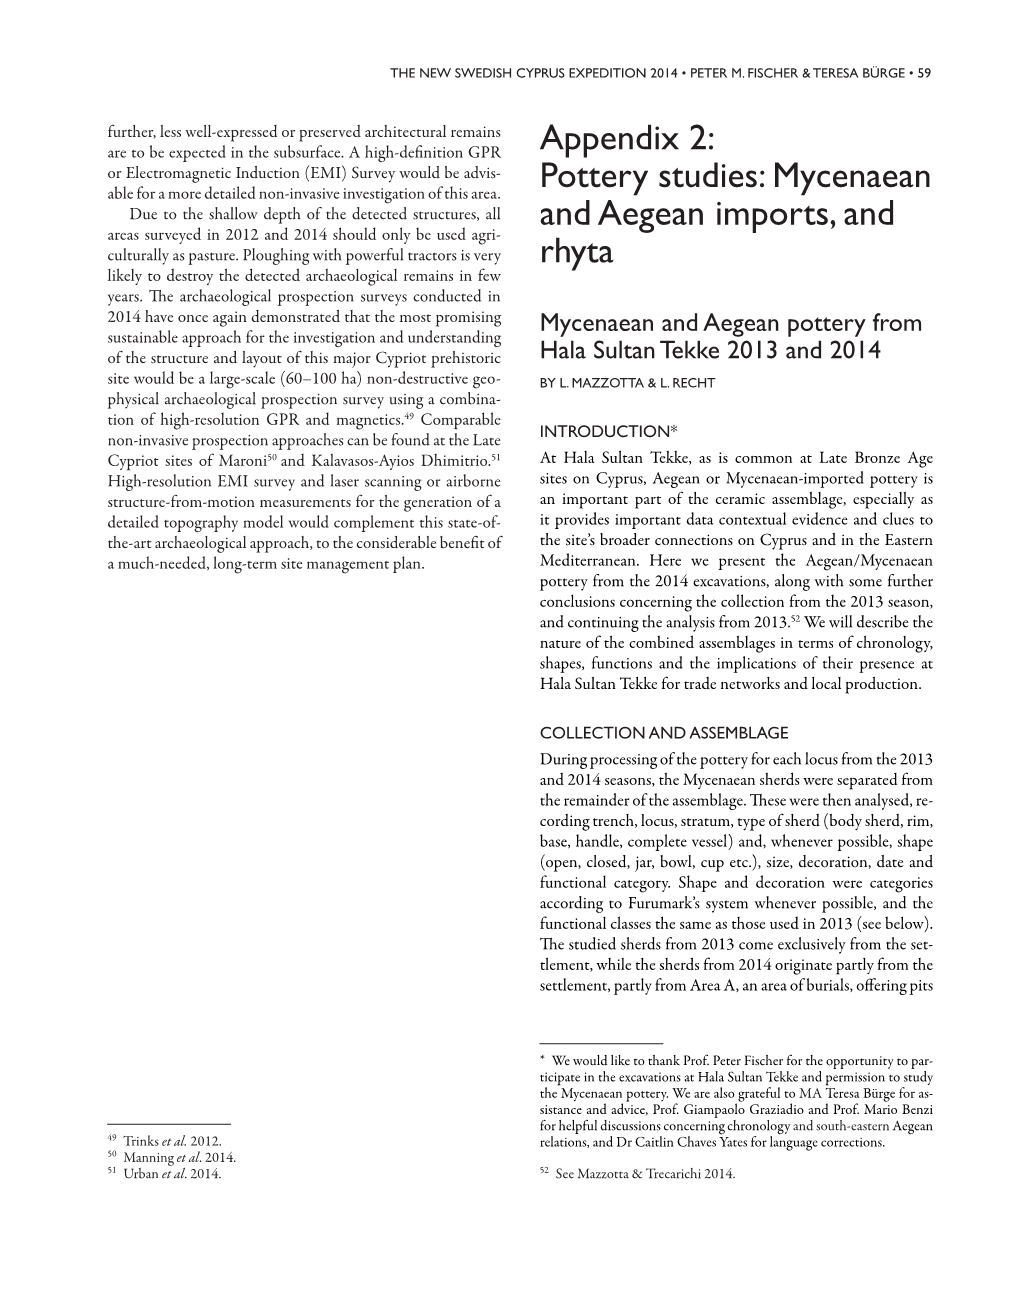 Pottery Studies: Mycenaean and Aegean Imports, and Rhyta